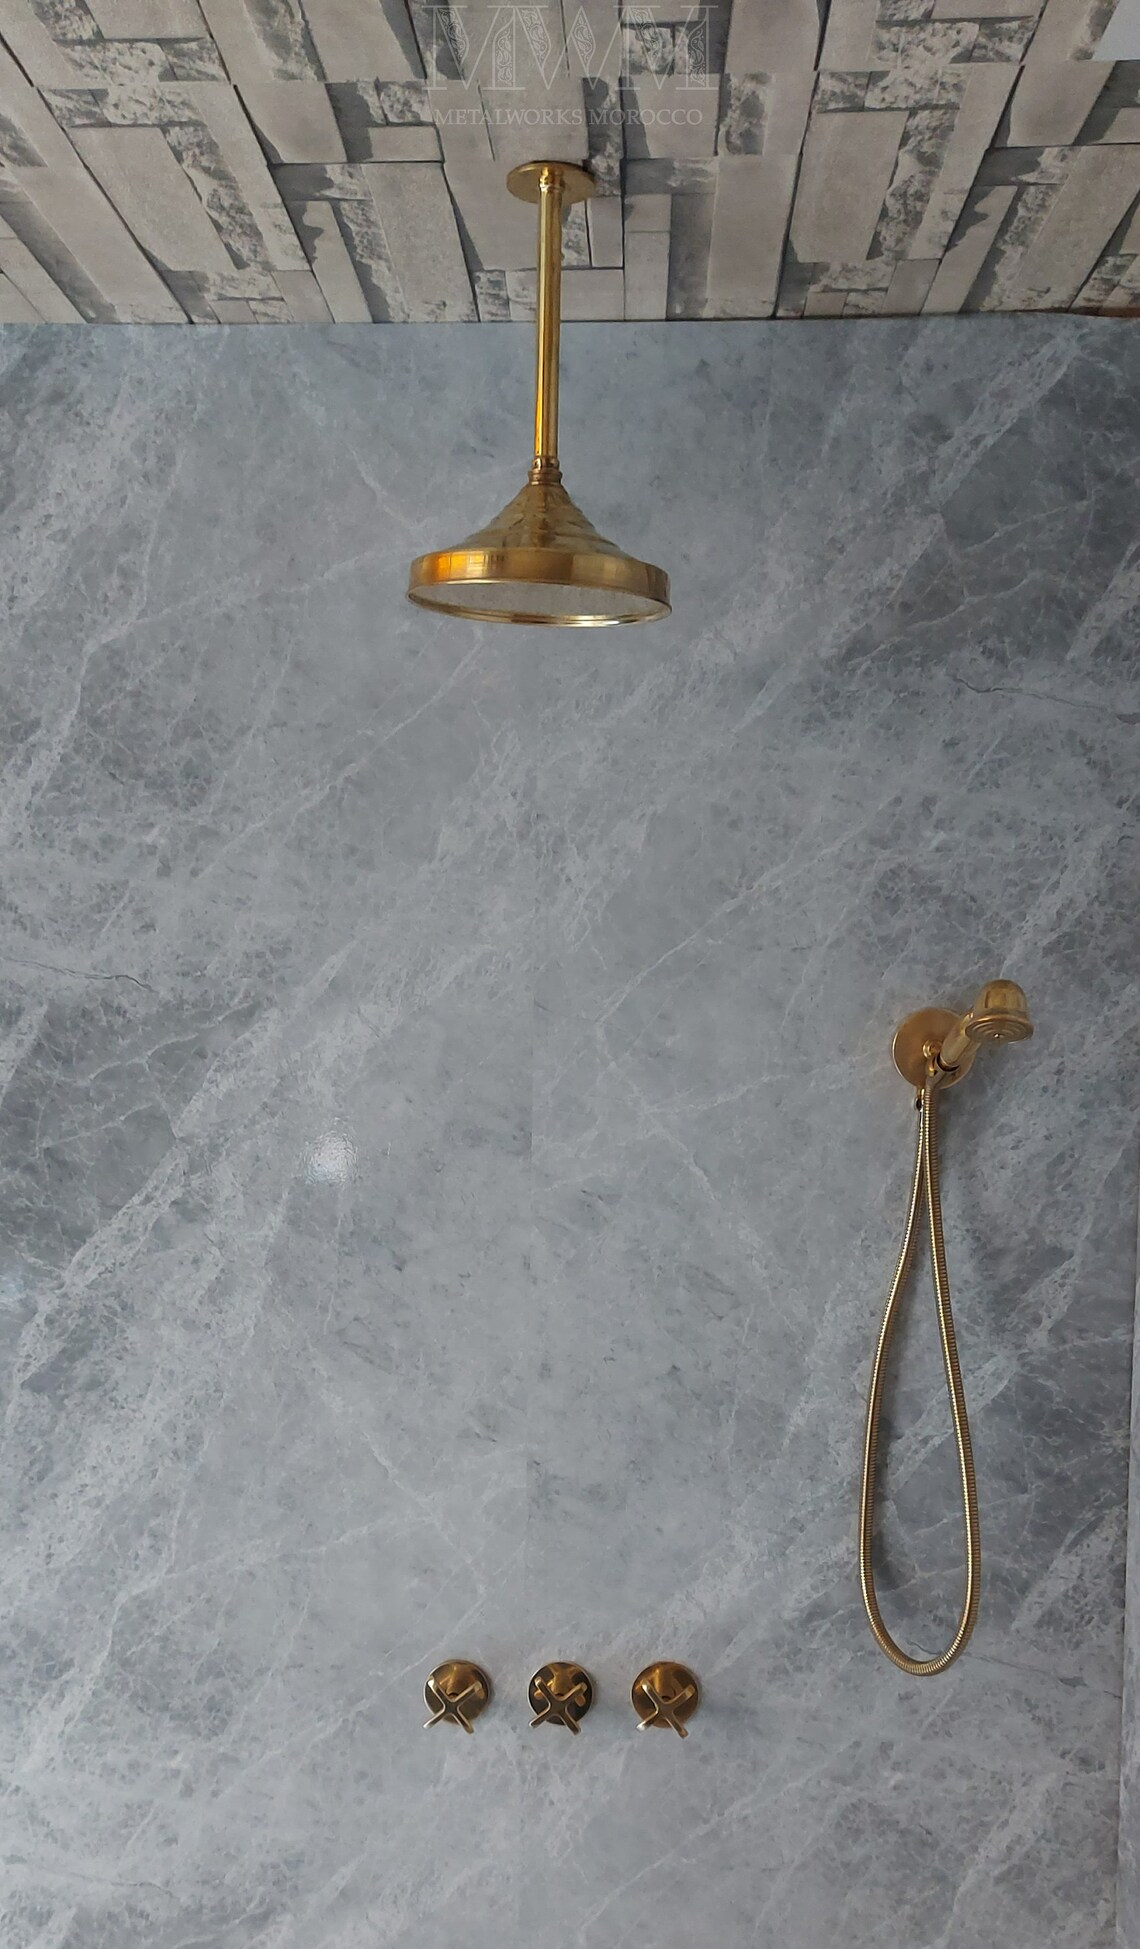 Solid Brass Ceiling Mounted Rain Shower Head With Handheld